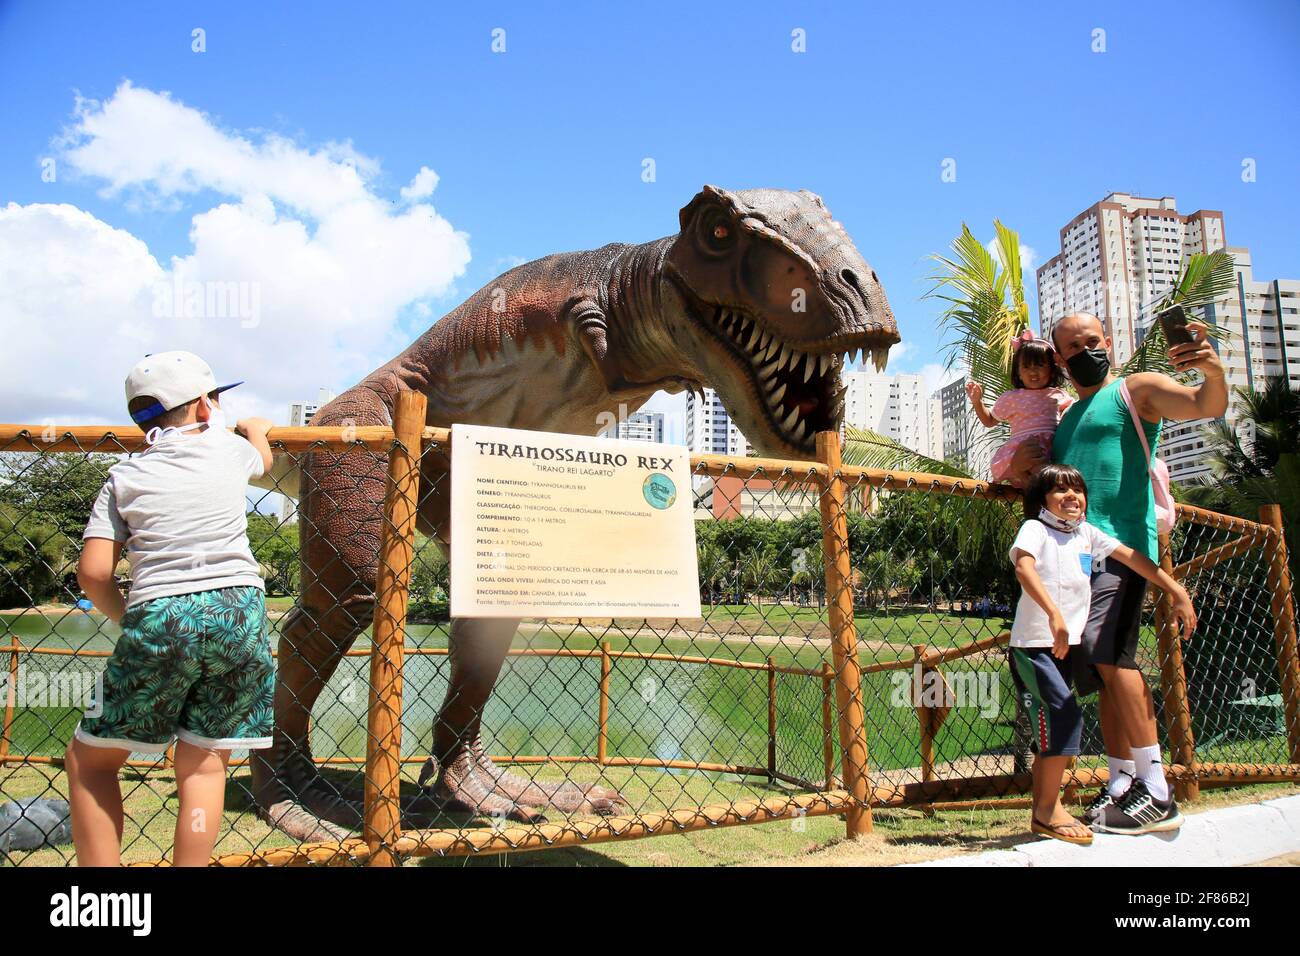 Full Size Tyrannosaurus Rex High Resolution Stock Photography and Images -  Alamy